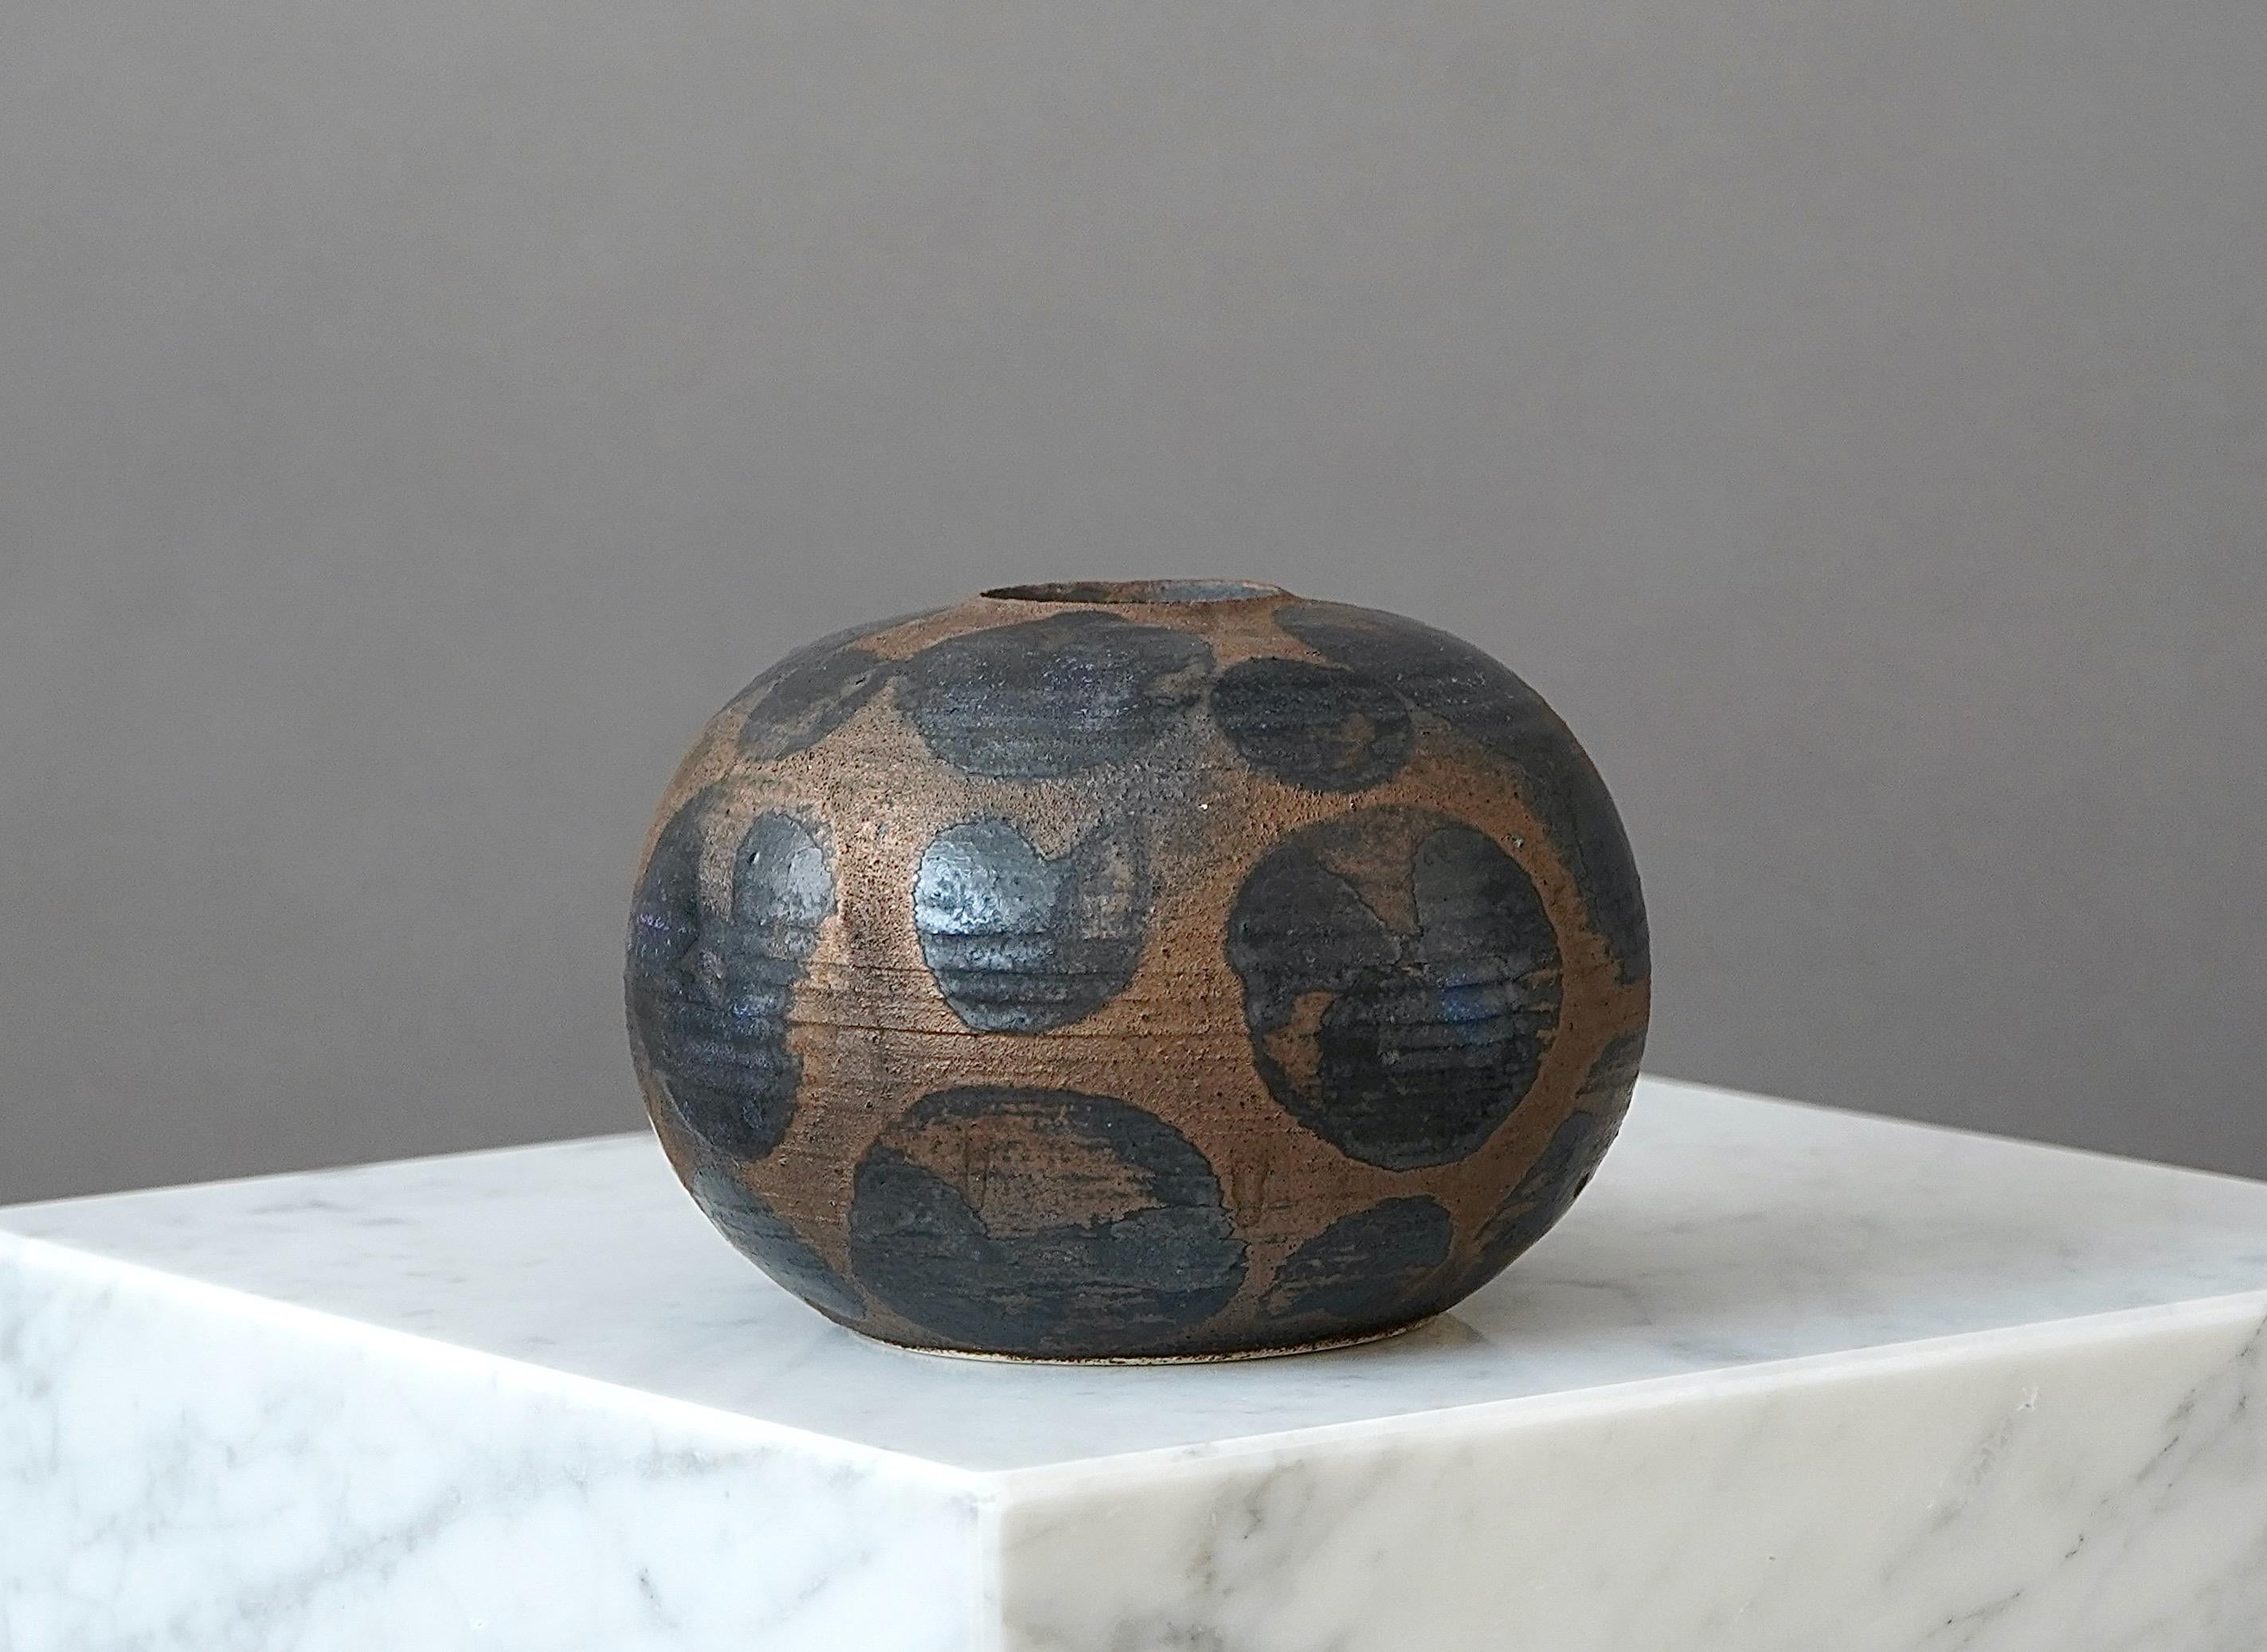 A beautiful and unique stoneware vase with amazing glaze.
Made by Anja Jaatinen-Winqvist for Arabia, Finland, 1960s.

Great condition. 
Incised signature 